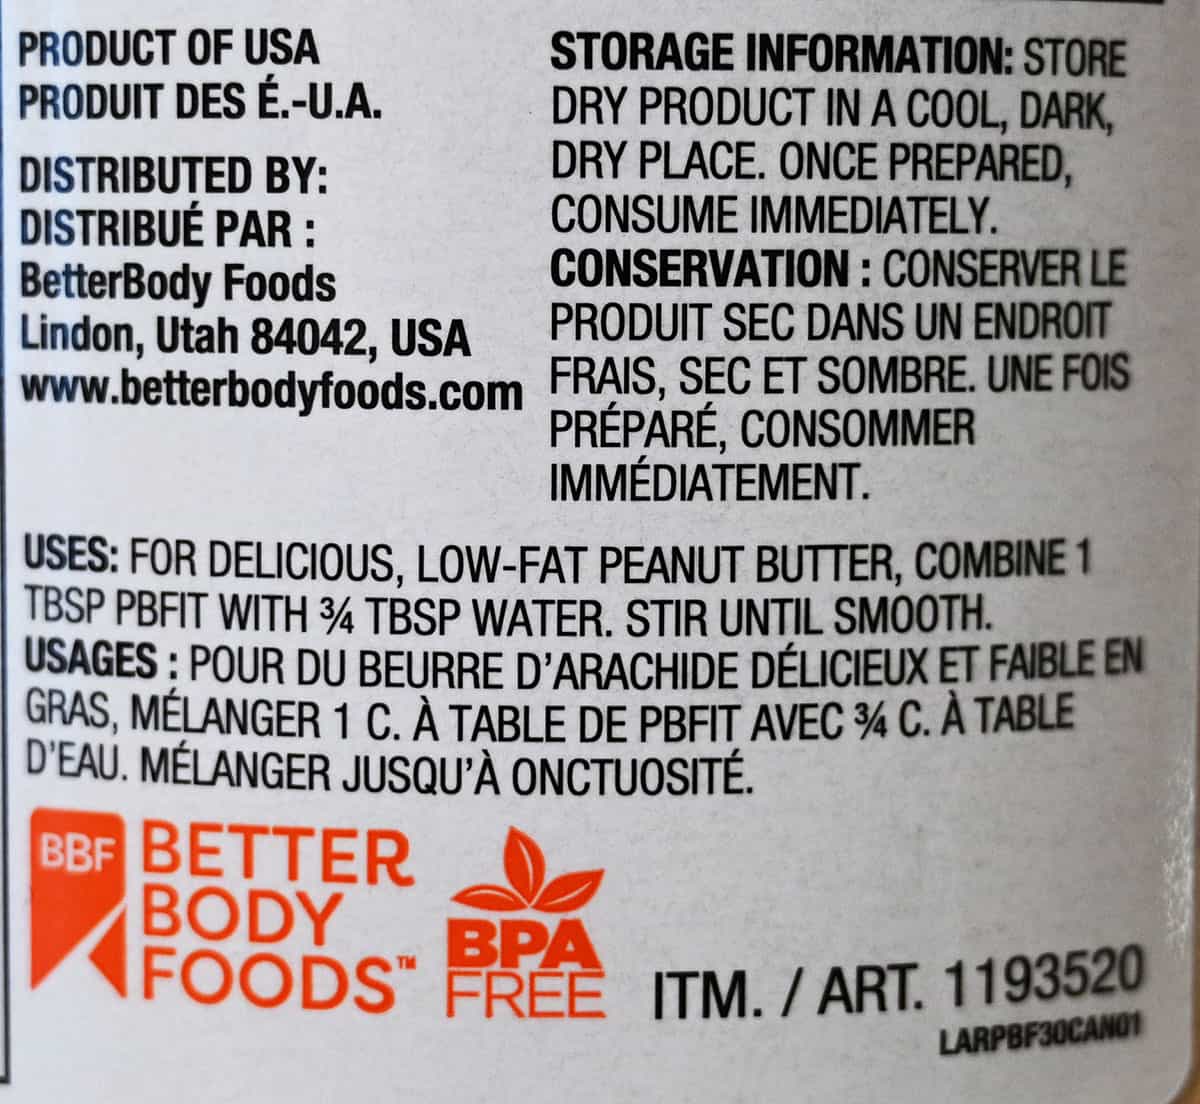 Image of the store information and preparation instructions from the back of the container.